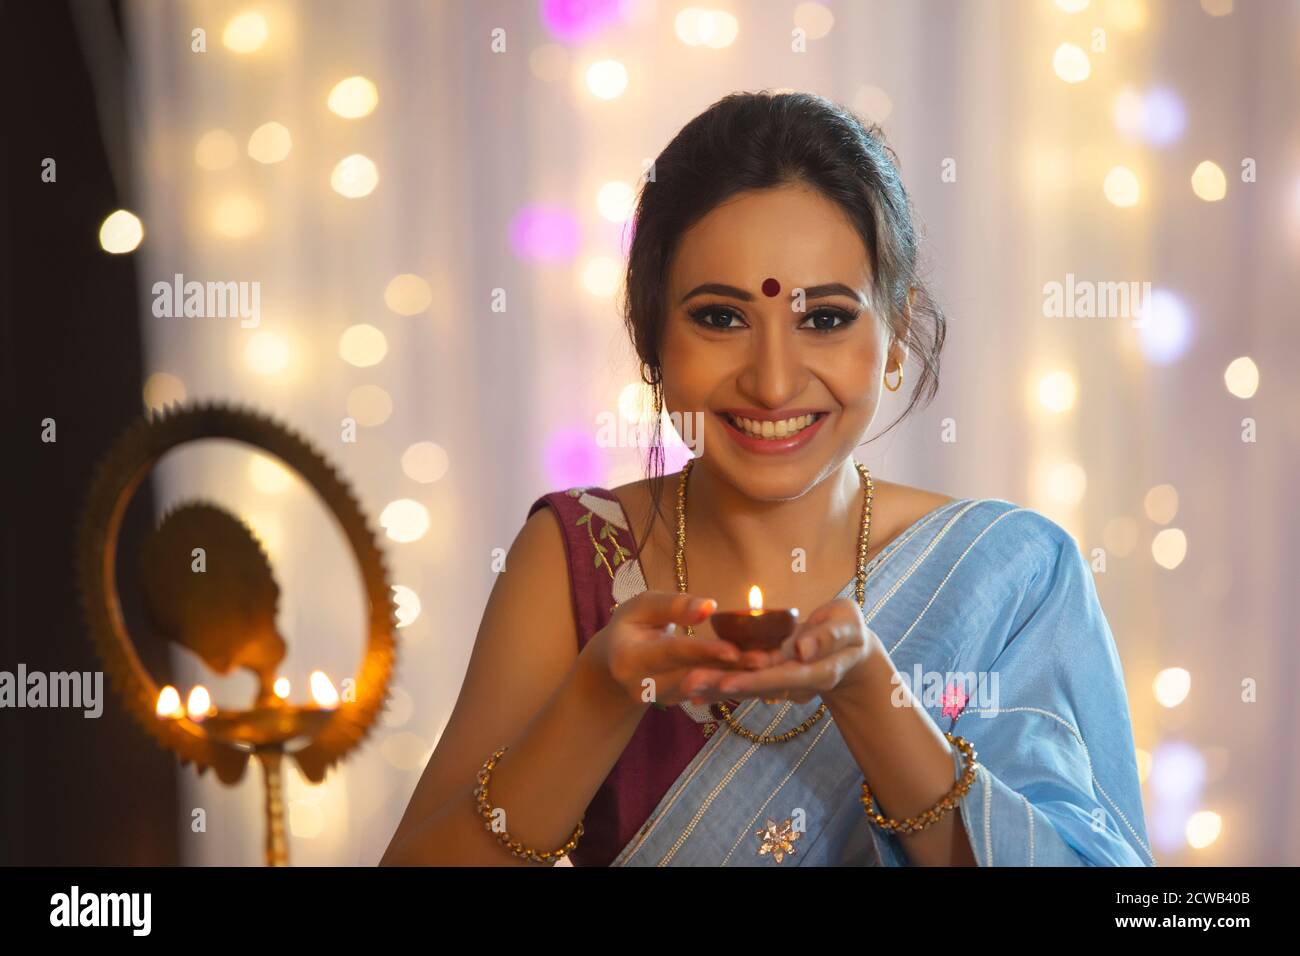 Woman smiling while holding a diya to light a lamp on the occasion of Diwali Stock Photo